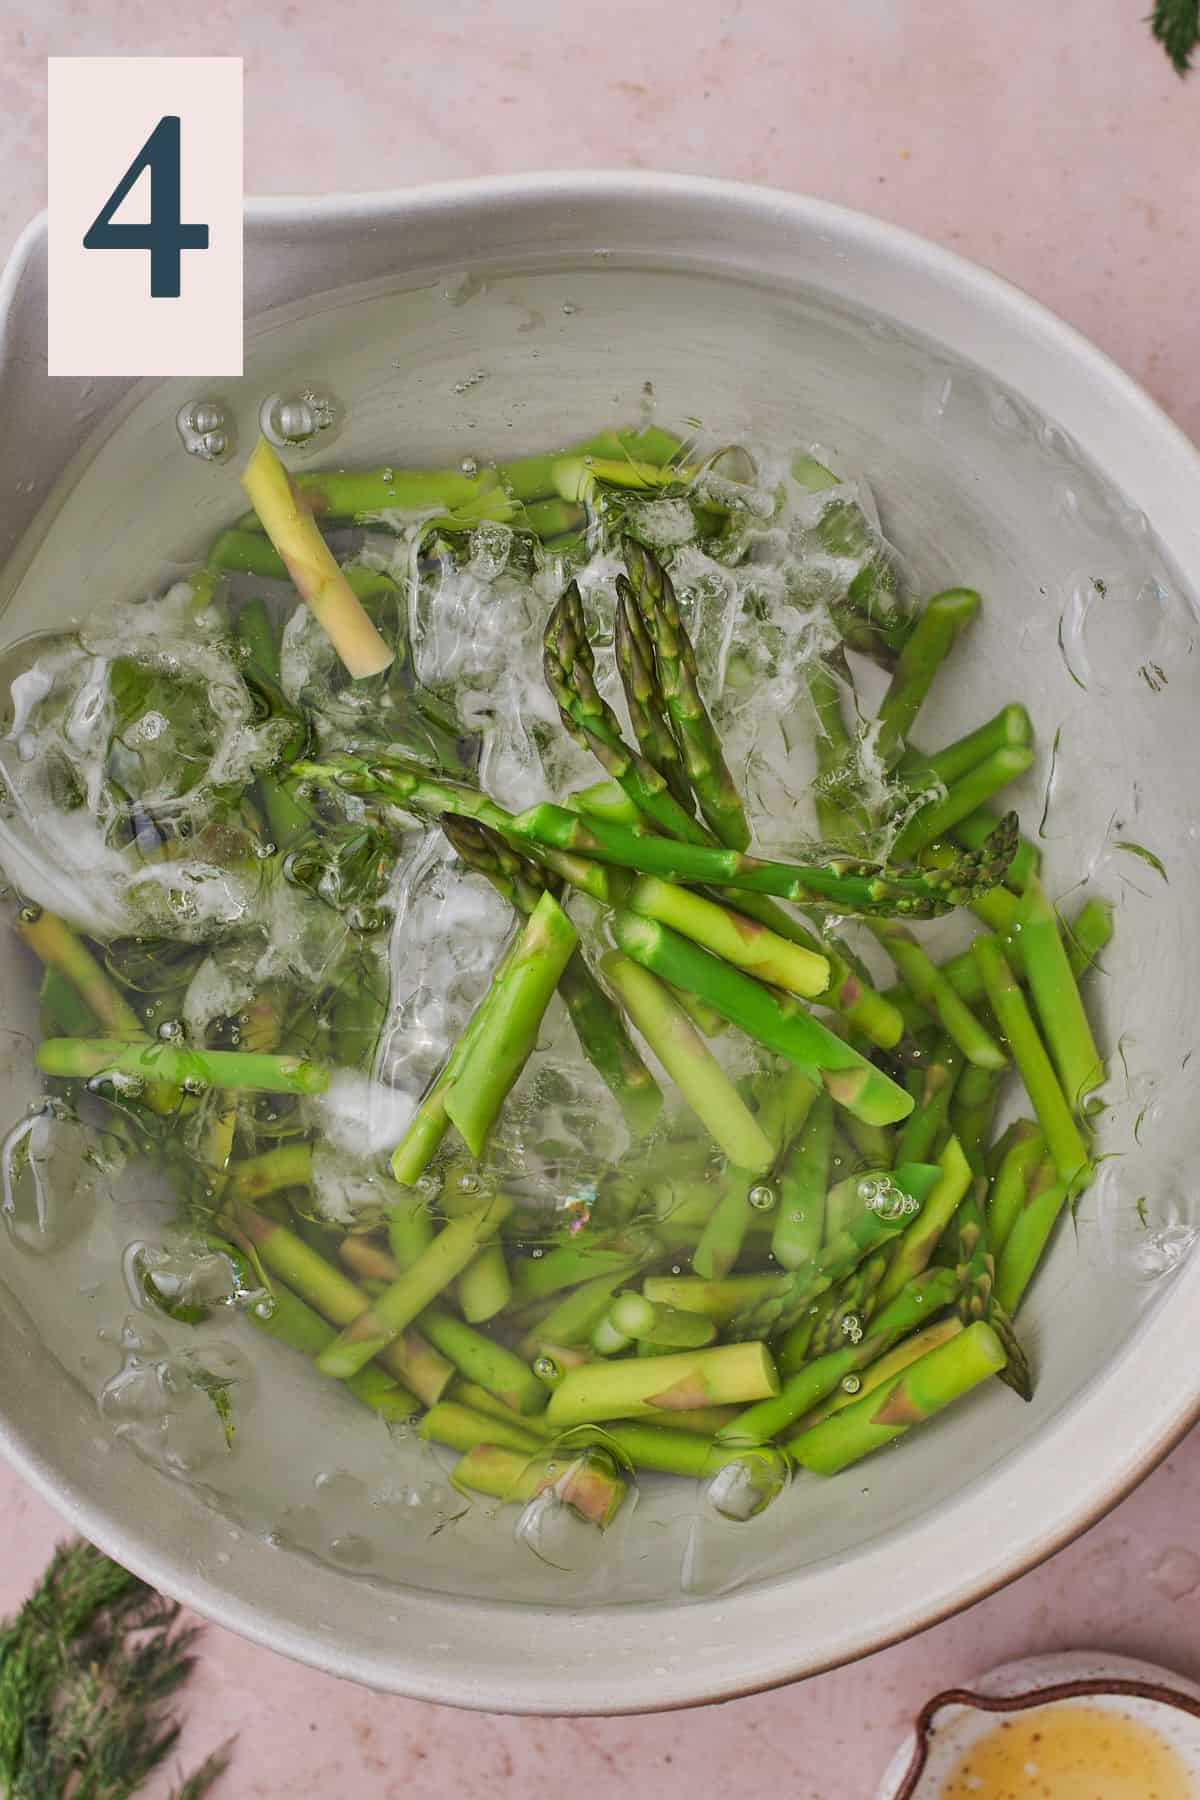 Plunging cooked asparagus into an ice bath to blanch them.